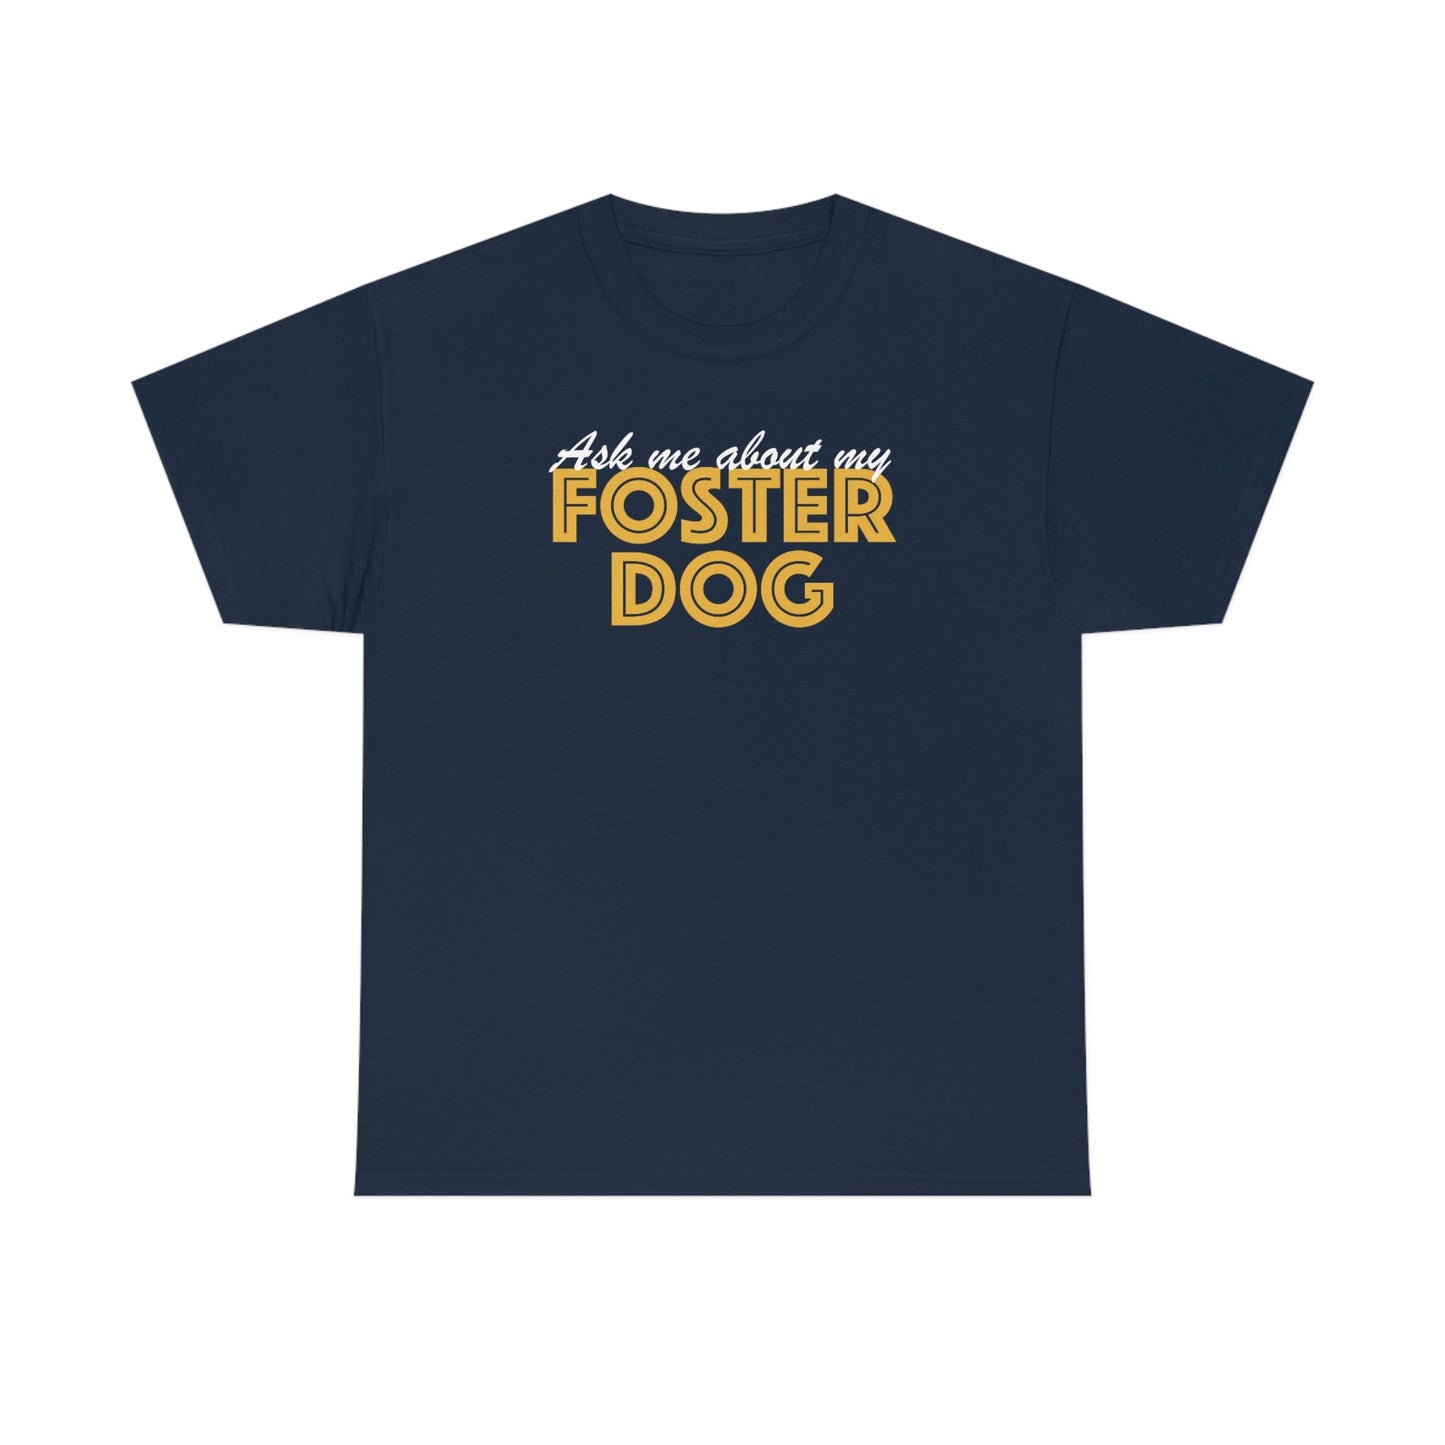 Ask Me About My Foster Dog | Text Tees - Detezi Designs-25086147192392242572